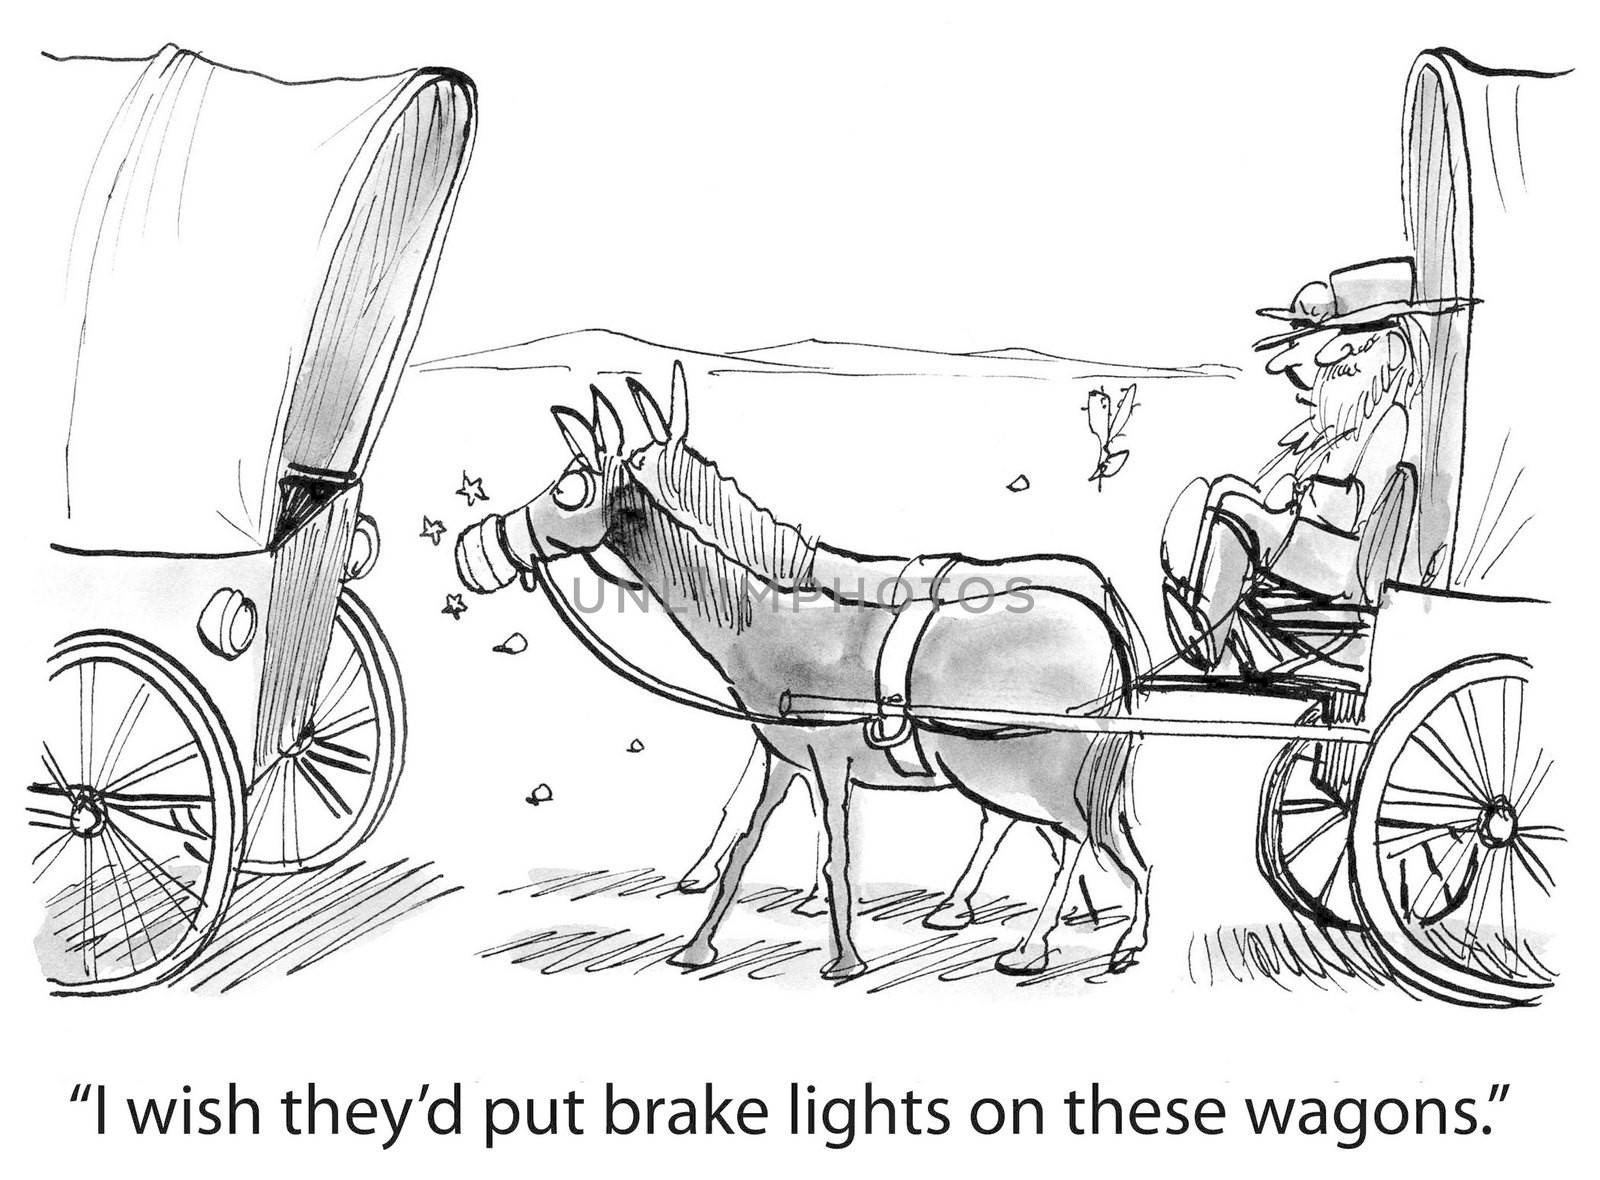 "I wish they'd put brake lights on these wagons."